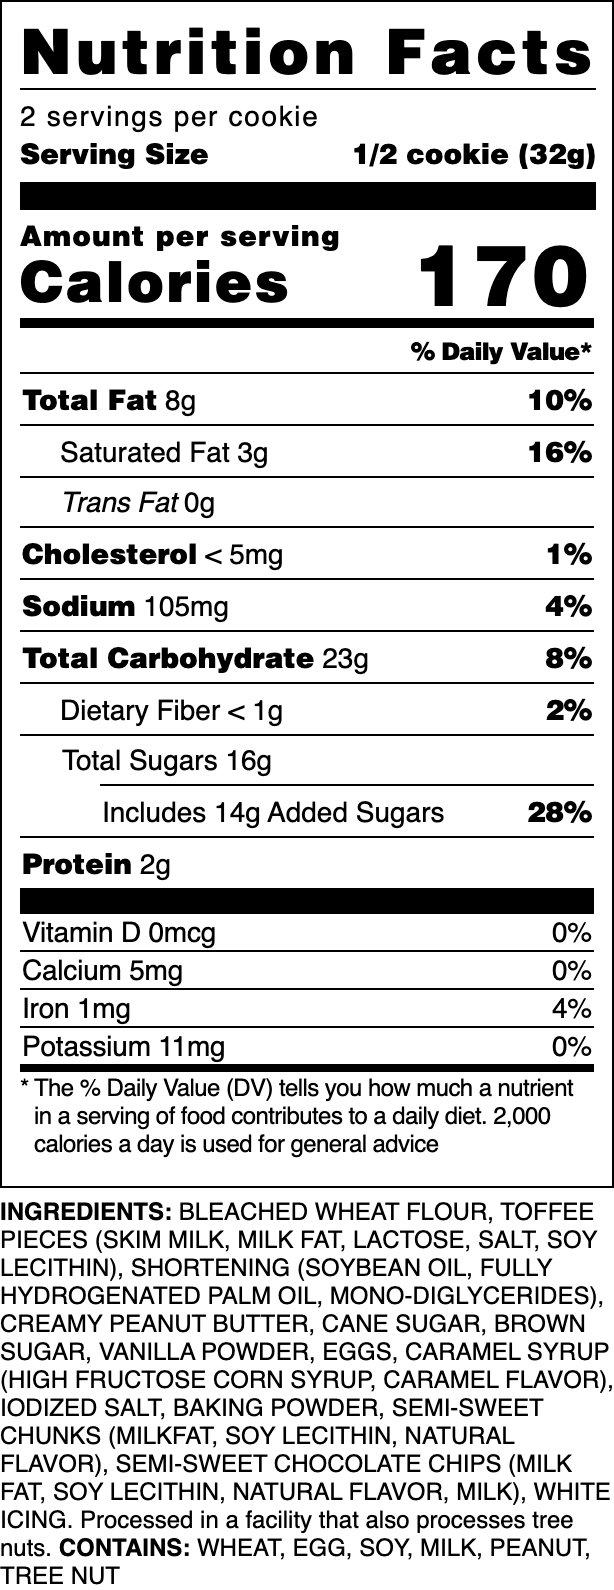 Nutrition label for our Caramel Rock cookie.